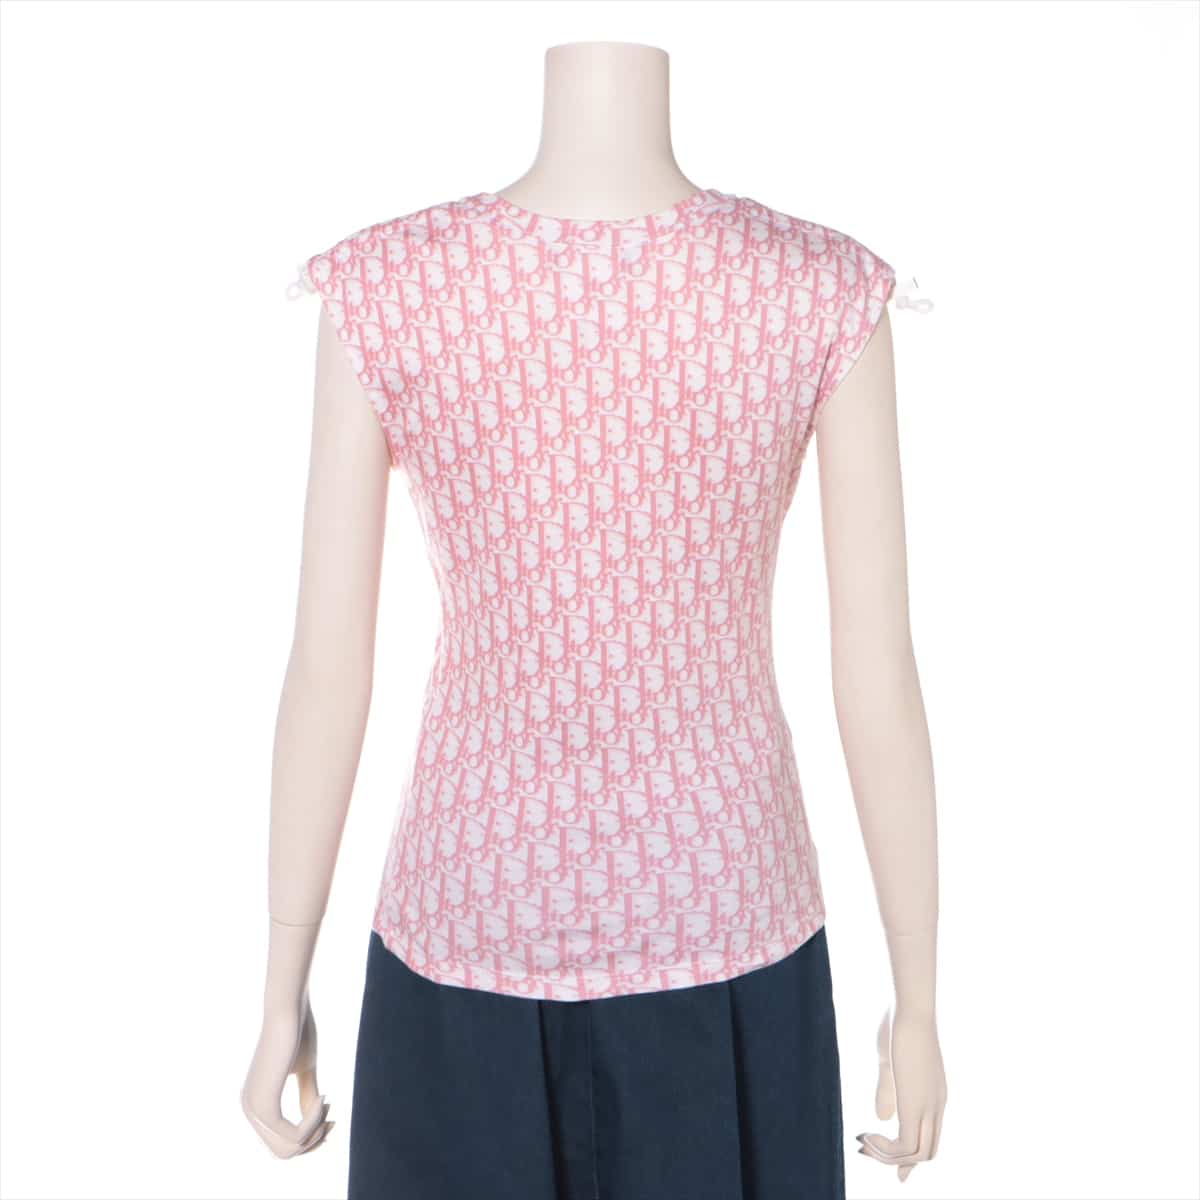 Christian Dior Trotter Cotton Tank top 36 Ladies' Pink  4P16155500